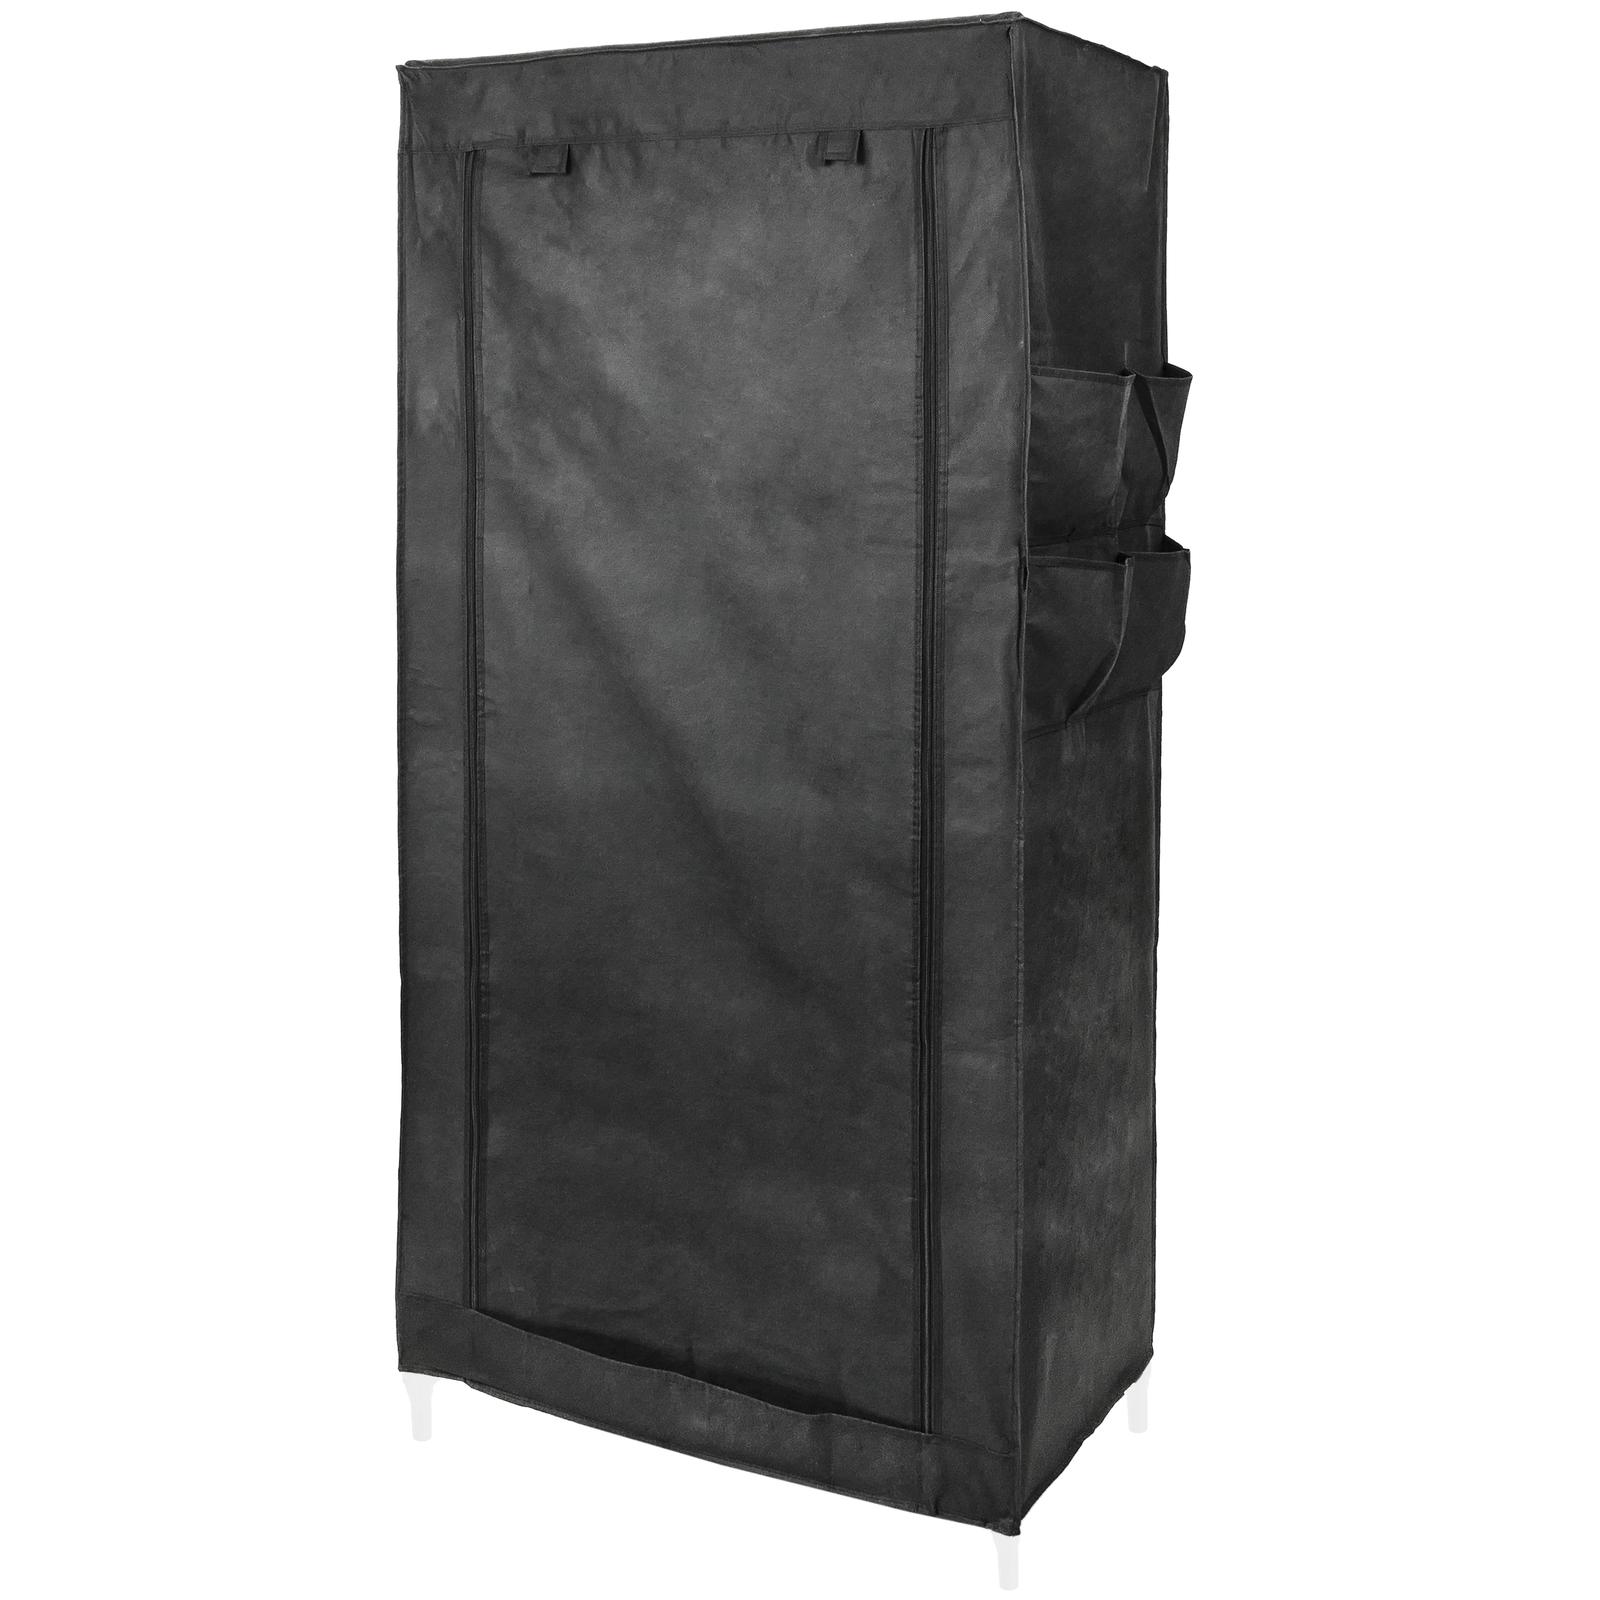 Fabric wardrobe for clothes storage and organiser 70 x 45 x 155 cm gray with roll-up door PrimeMatik 